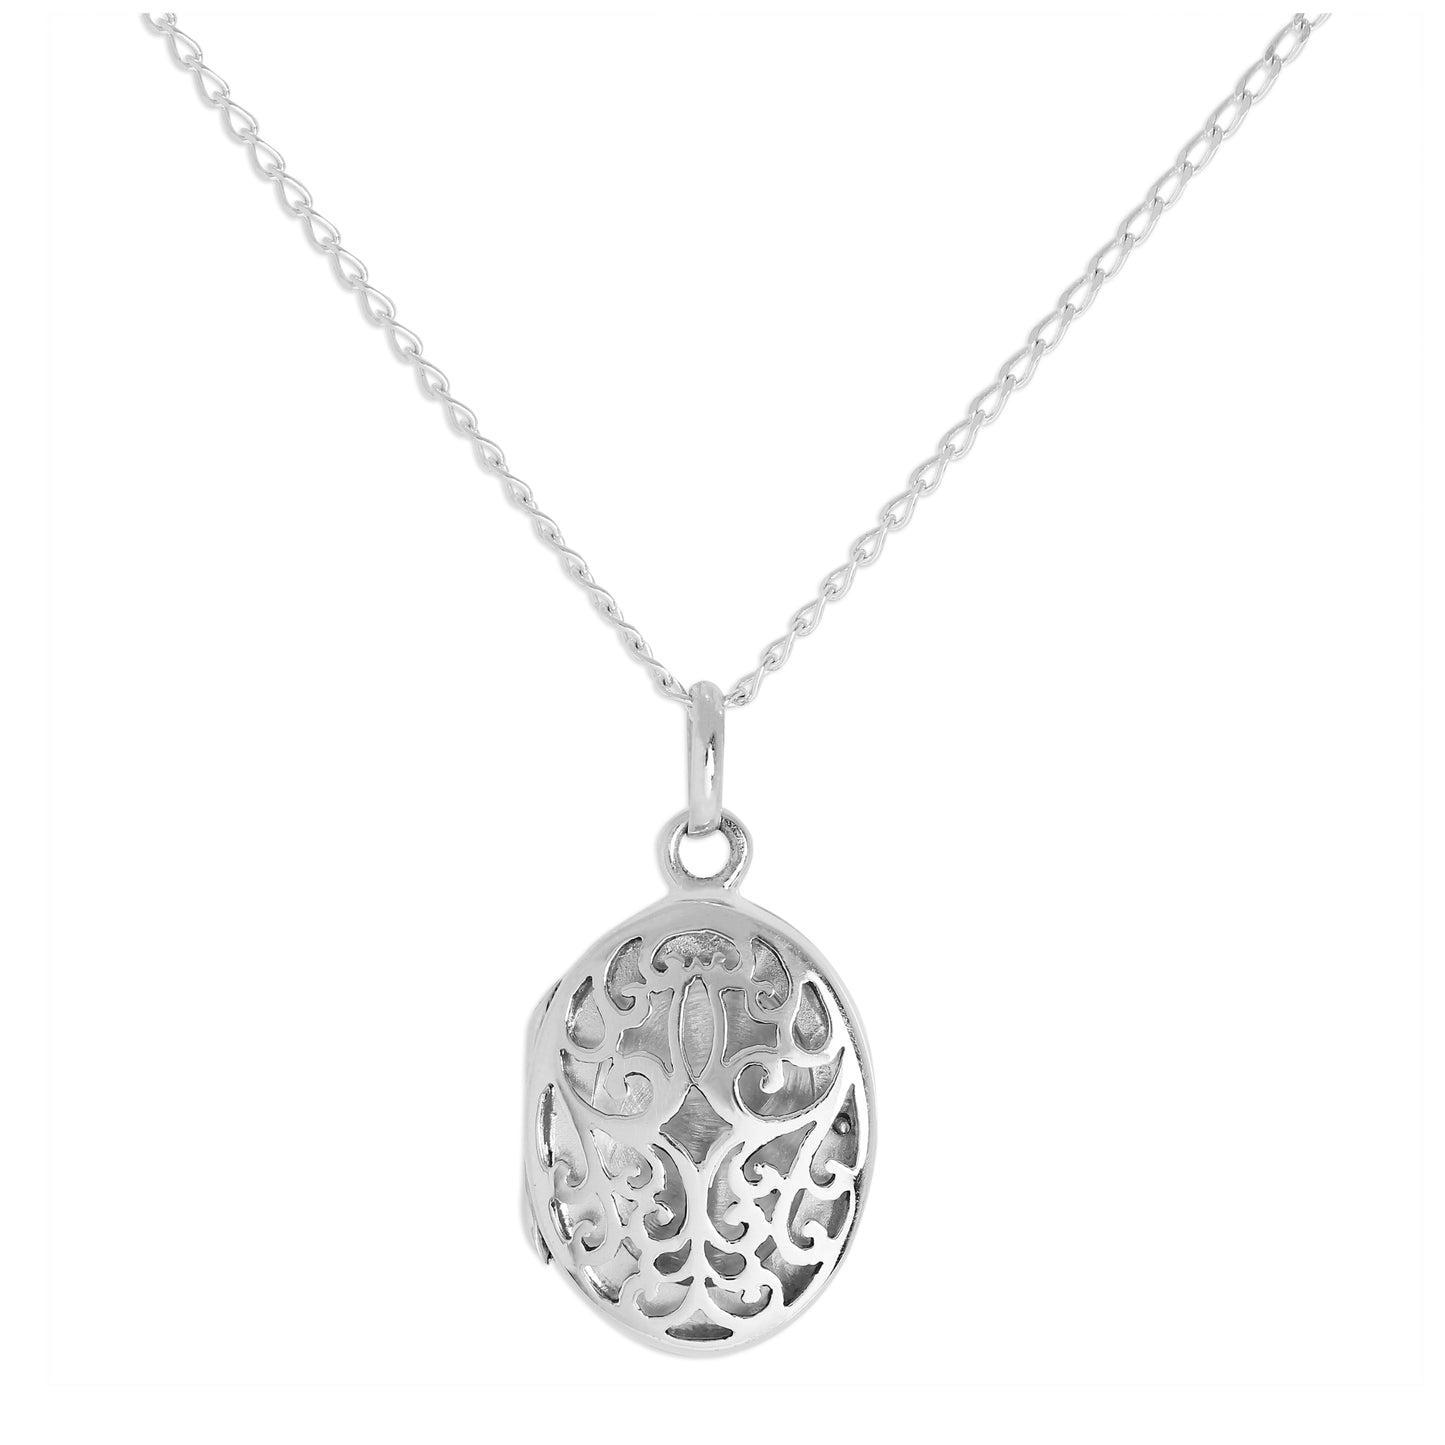 Sterling Silver Oval Locket with Cut Out Filigree Design on Chain 16 - 24 Inches